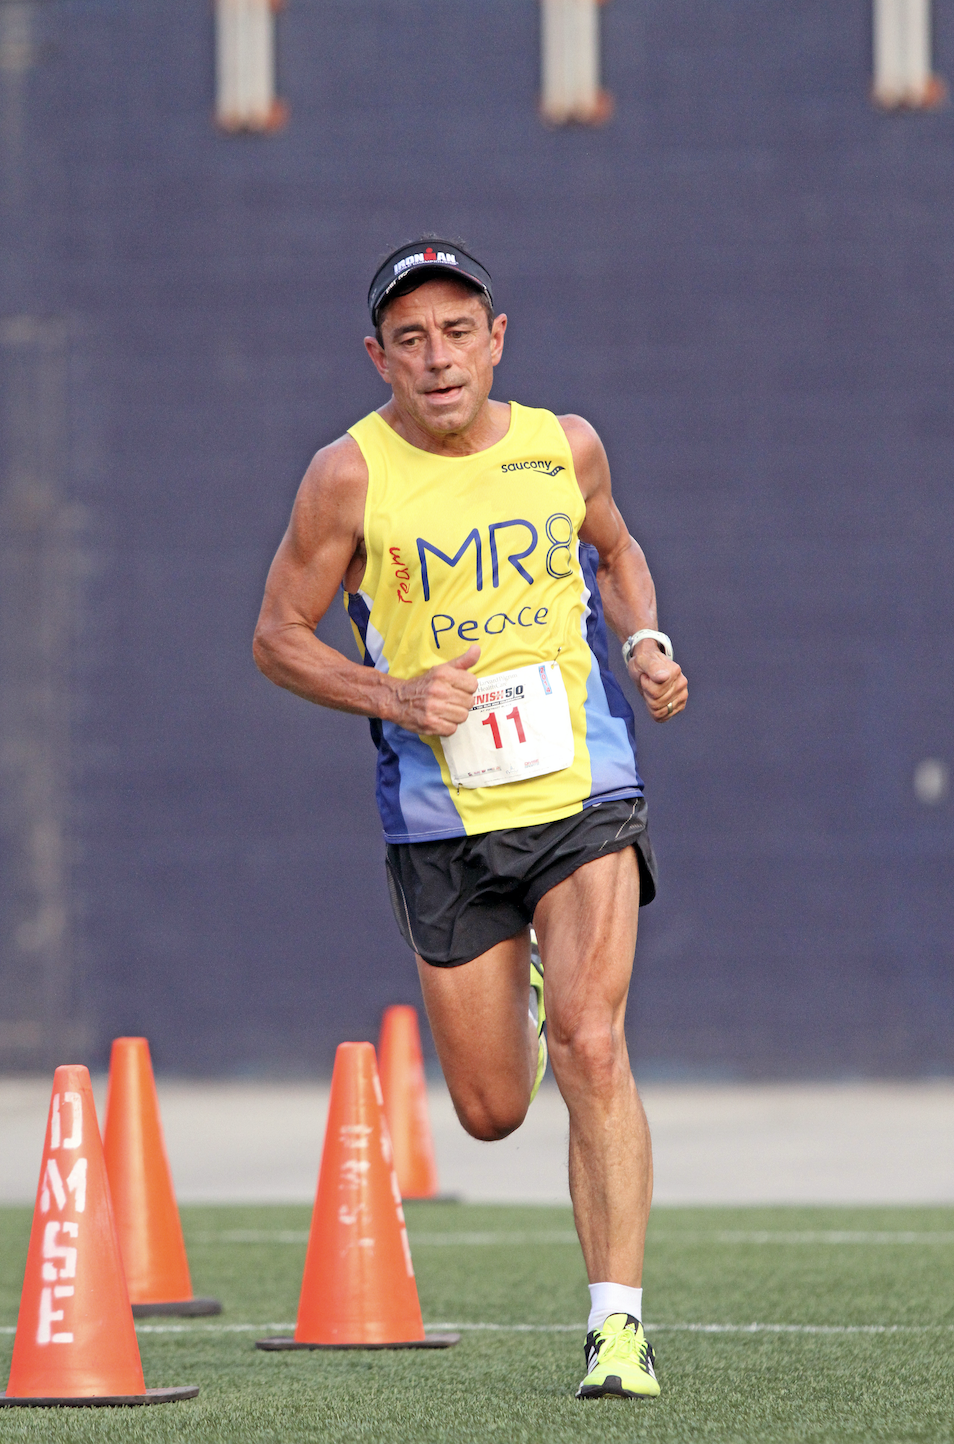 Dave-McGillivray-approaches-the-finish-line